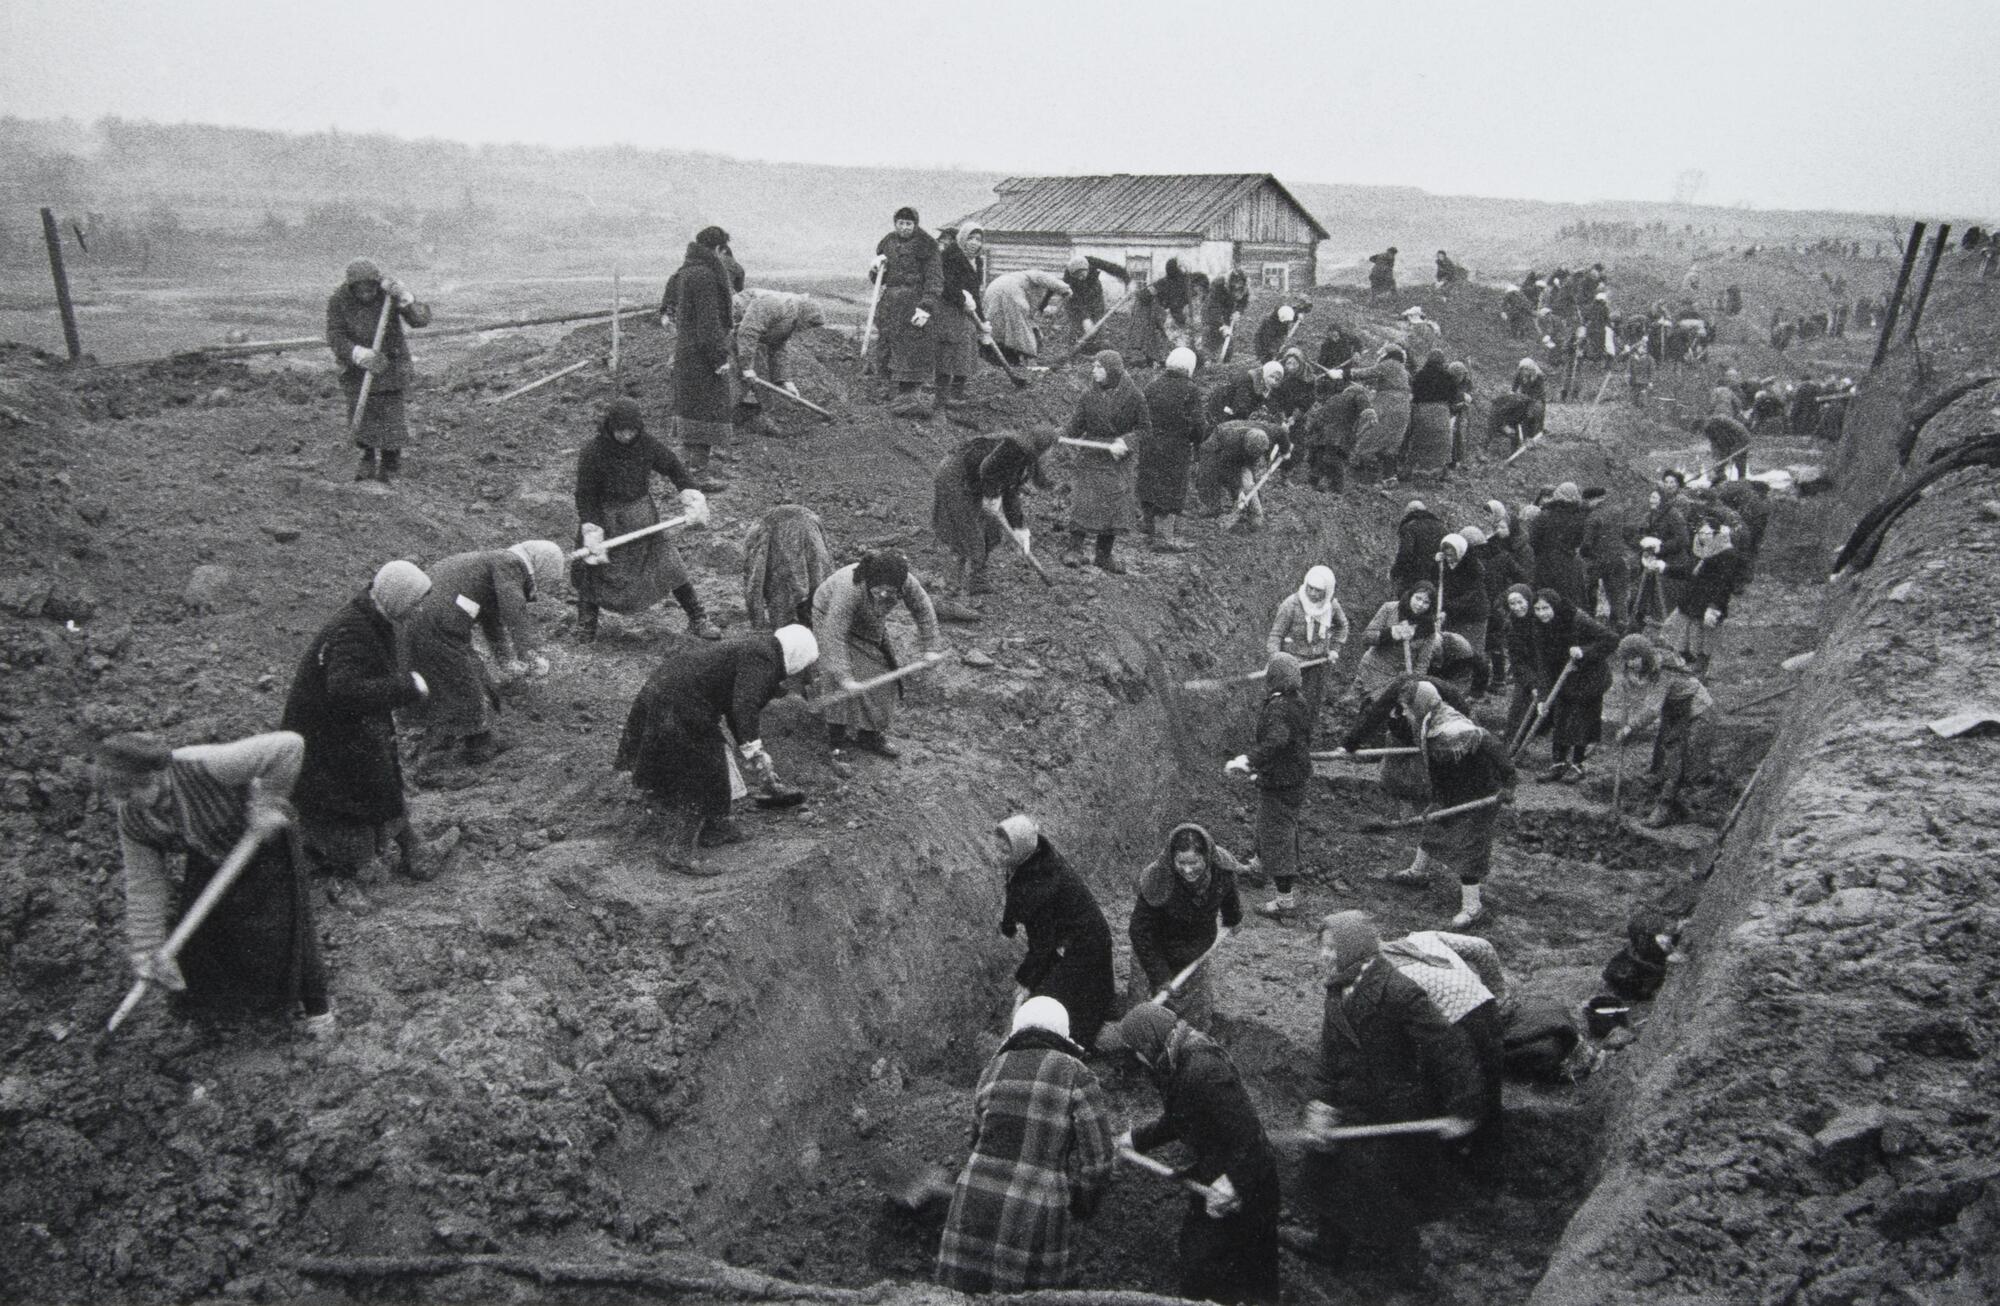 A large group of women with pickaxes and shovels dig a trench in a barren landscape.